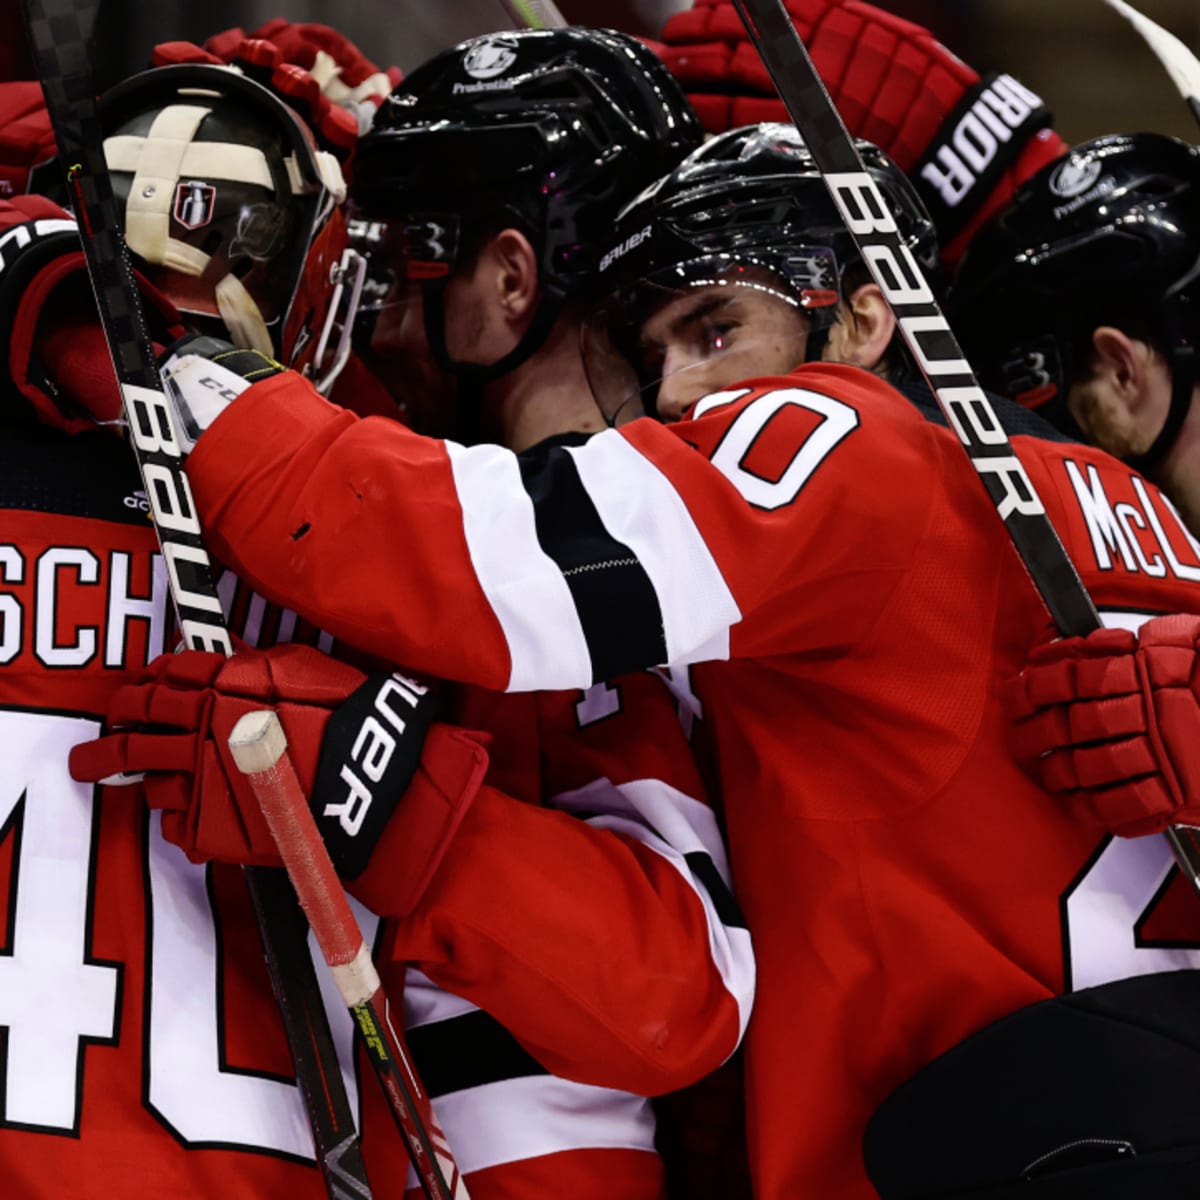 The Athletic on X: For the first time in 11 seasons, the New Jersey Devils  have won a playoff series. #NJDevils advance after beating their arch-rival  Rangers in a Game 7.  /